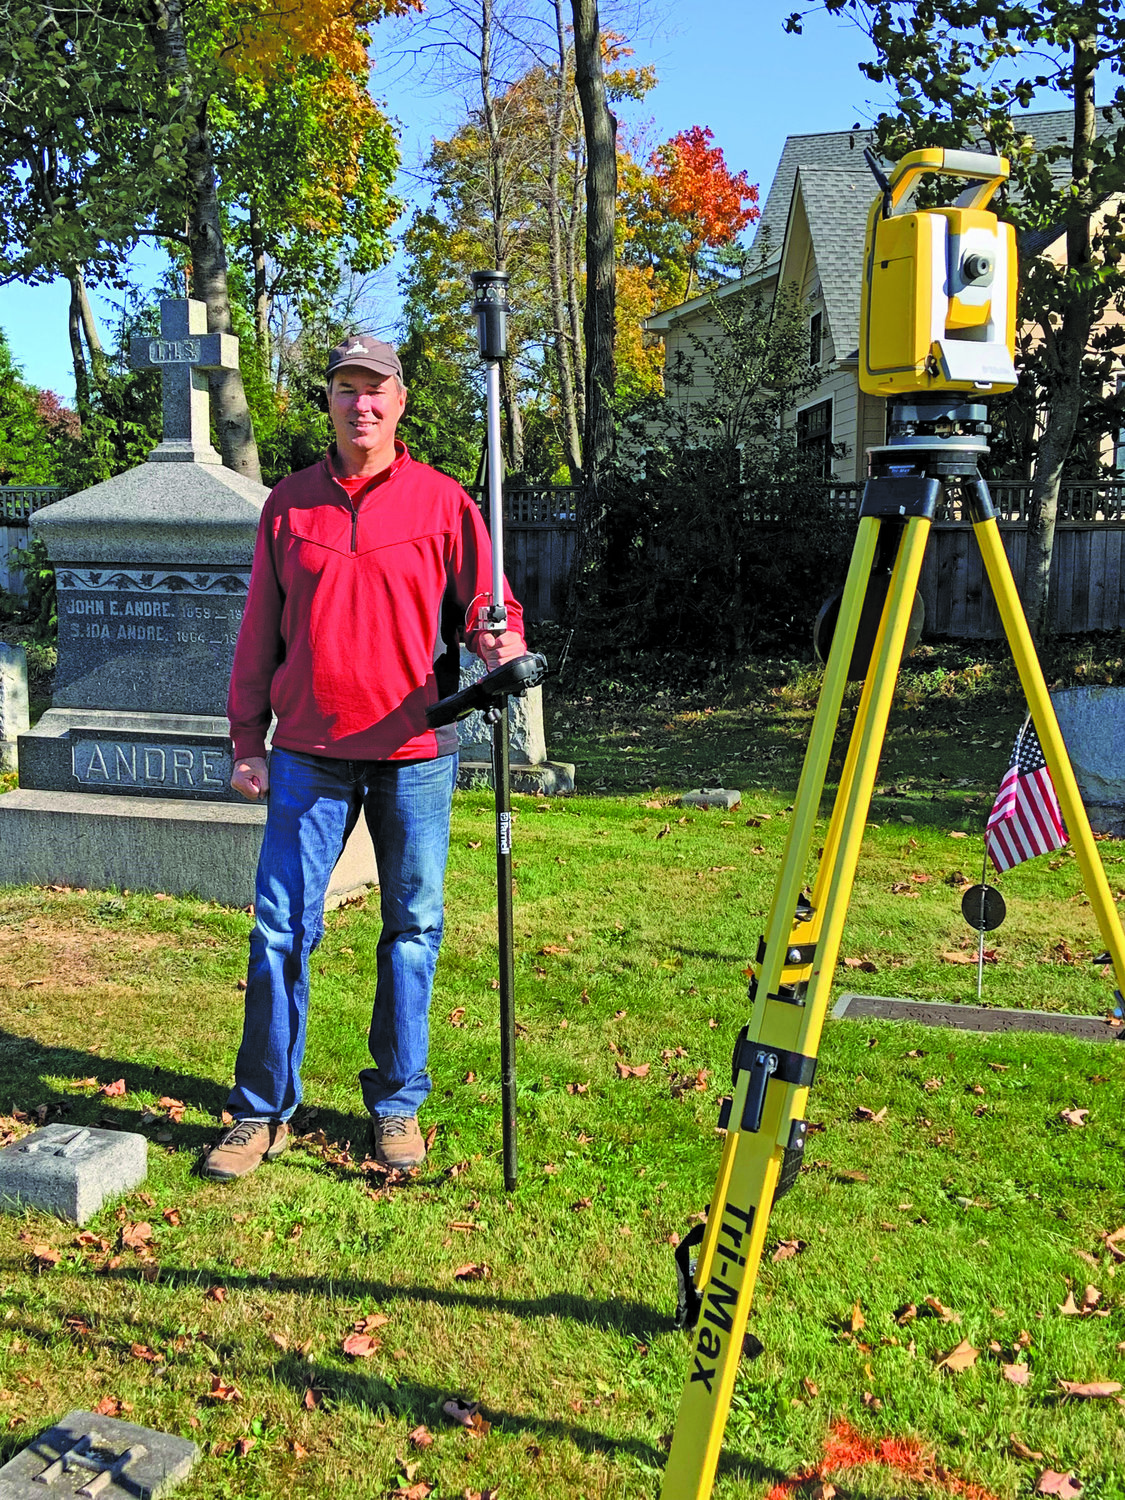 Benton Smith of Survey Mapping, brought his radar equipment to St. Mary’s Cemetery in Doylestown to look for unmarked graves.